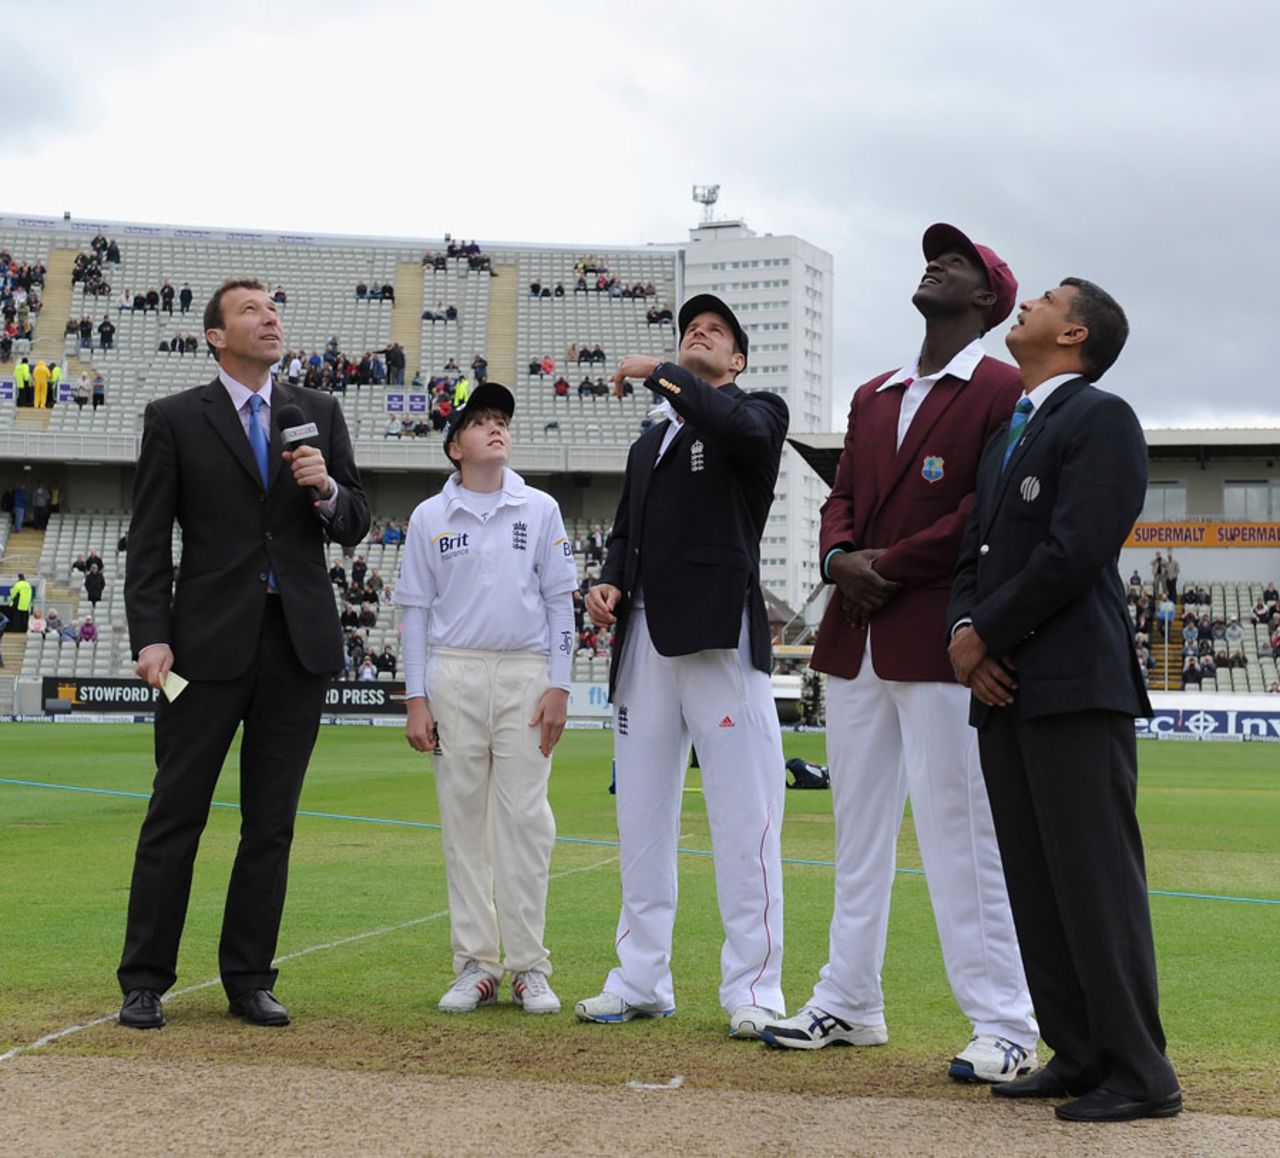 Andrew Strauss won the toss and decided to bowl first, England v West Indies, 3rd Test, Edgbaston, 3rd day, June, 9, 2012